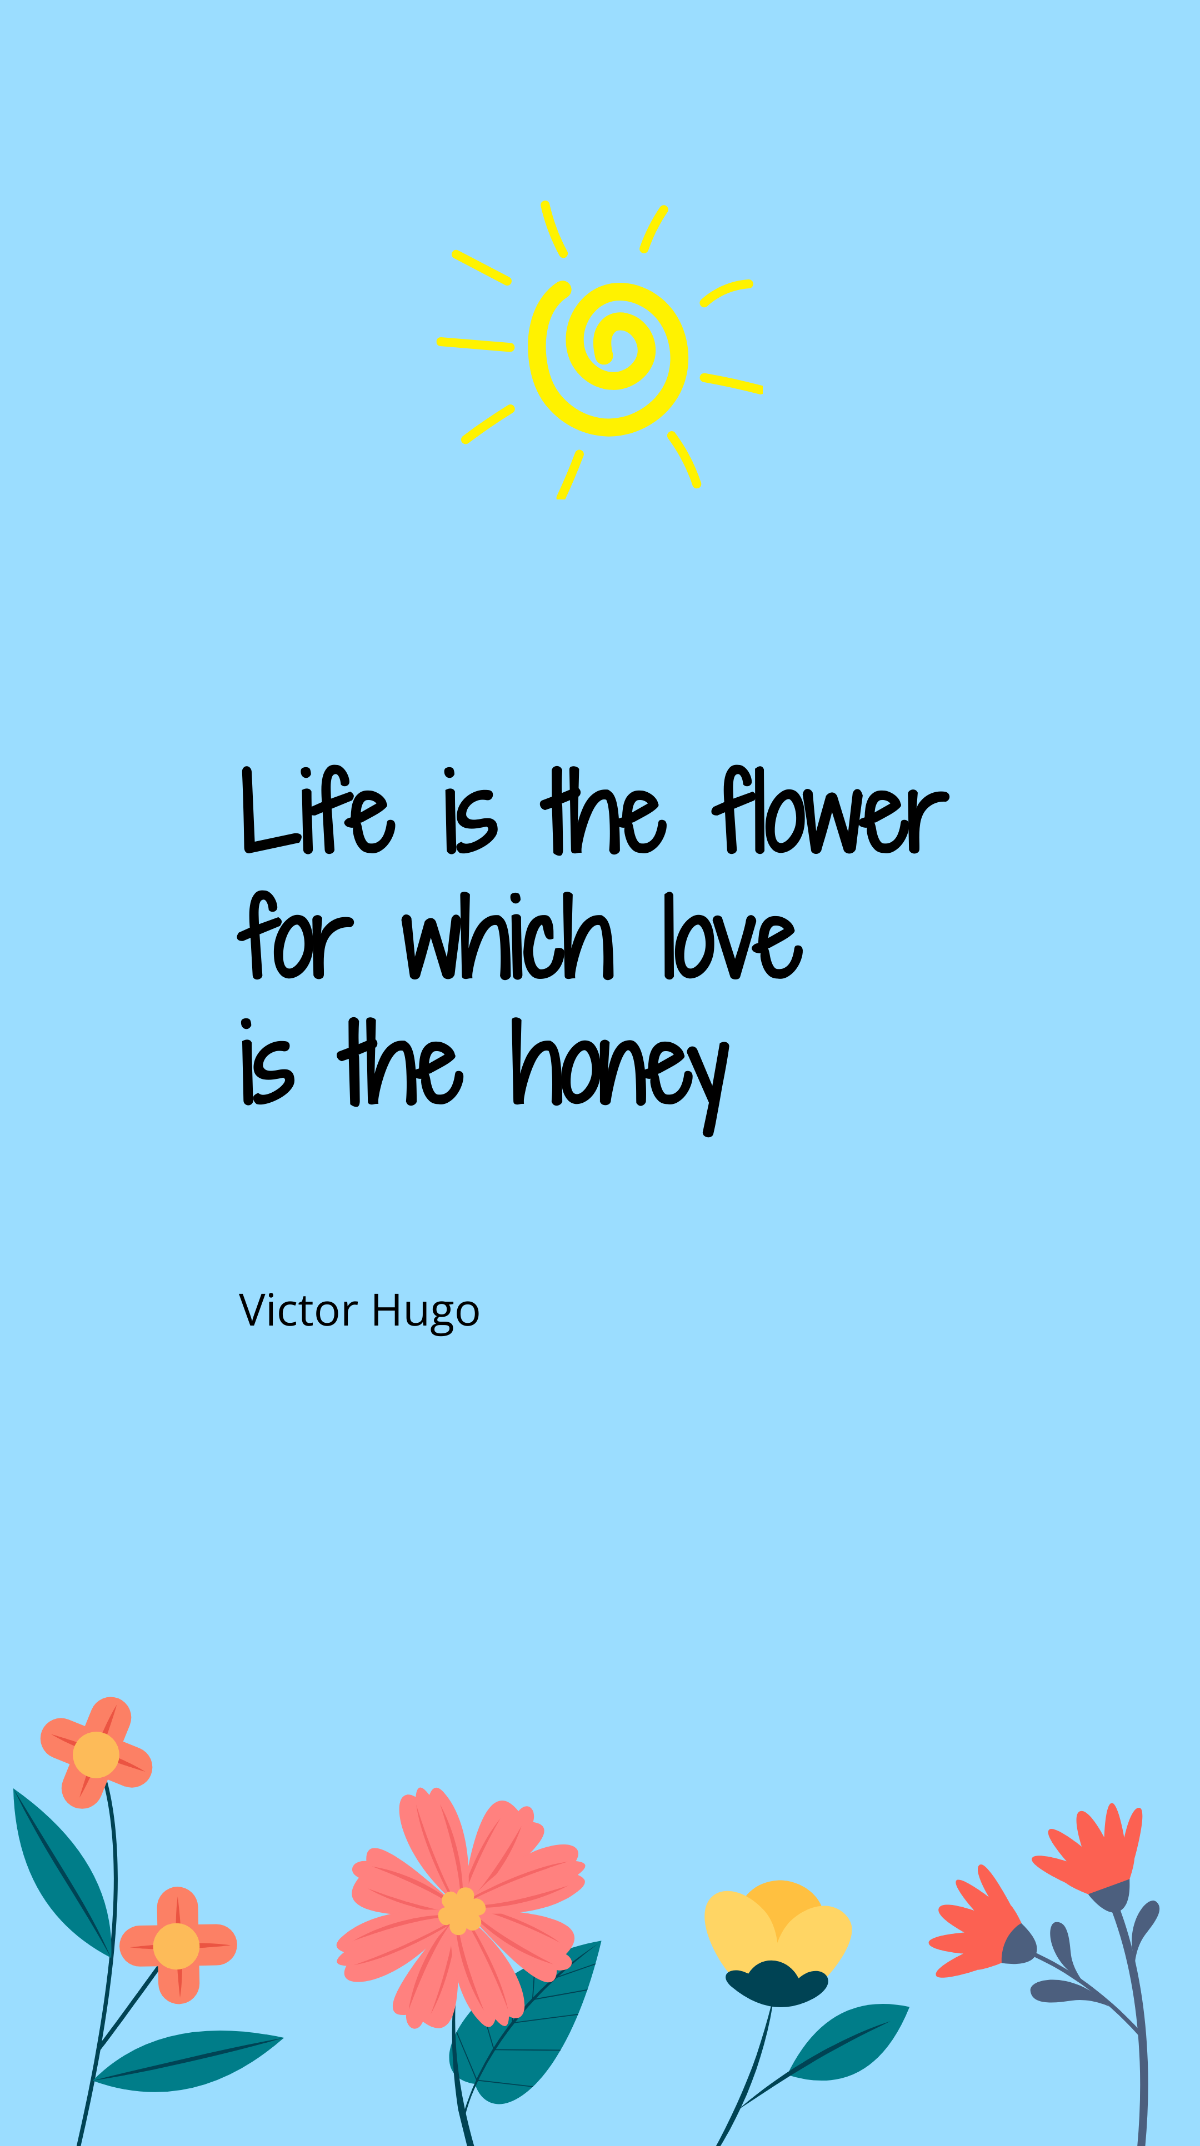 Victor Hugo - Life is the flower for which love is the honey  Template